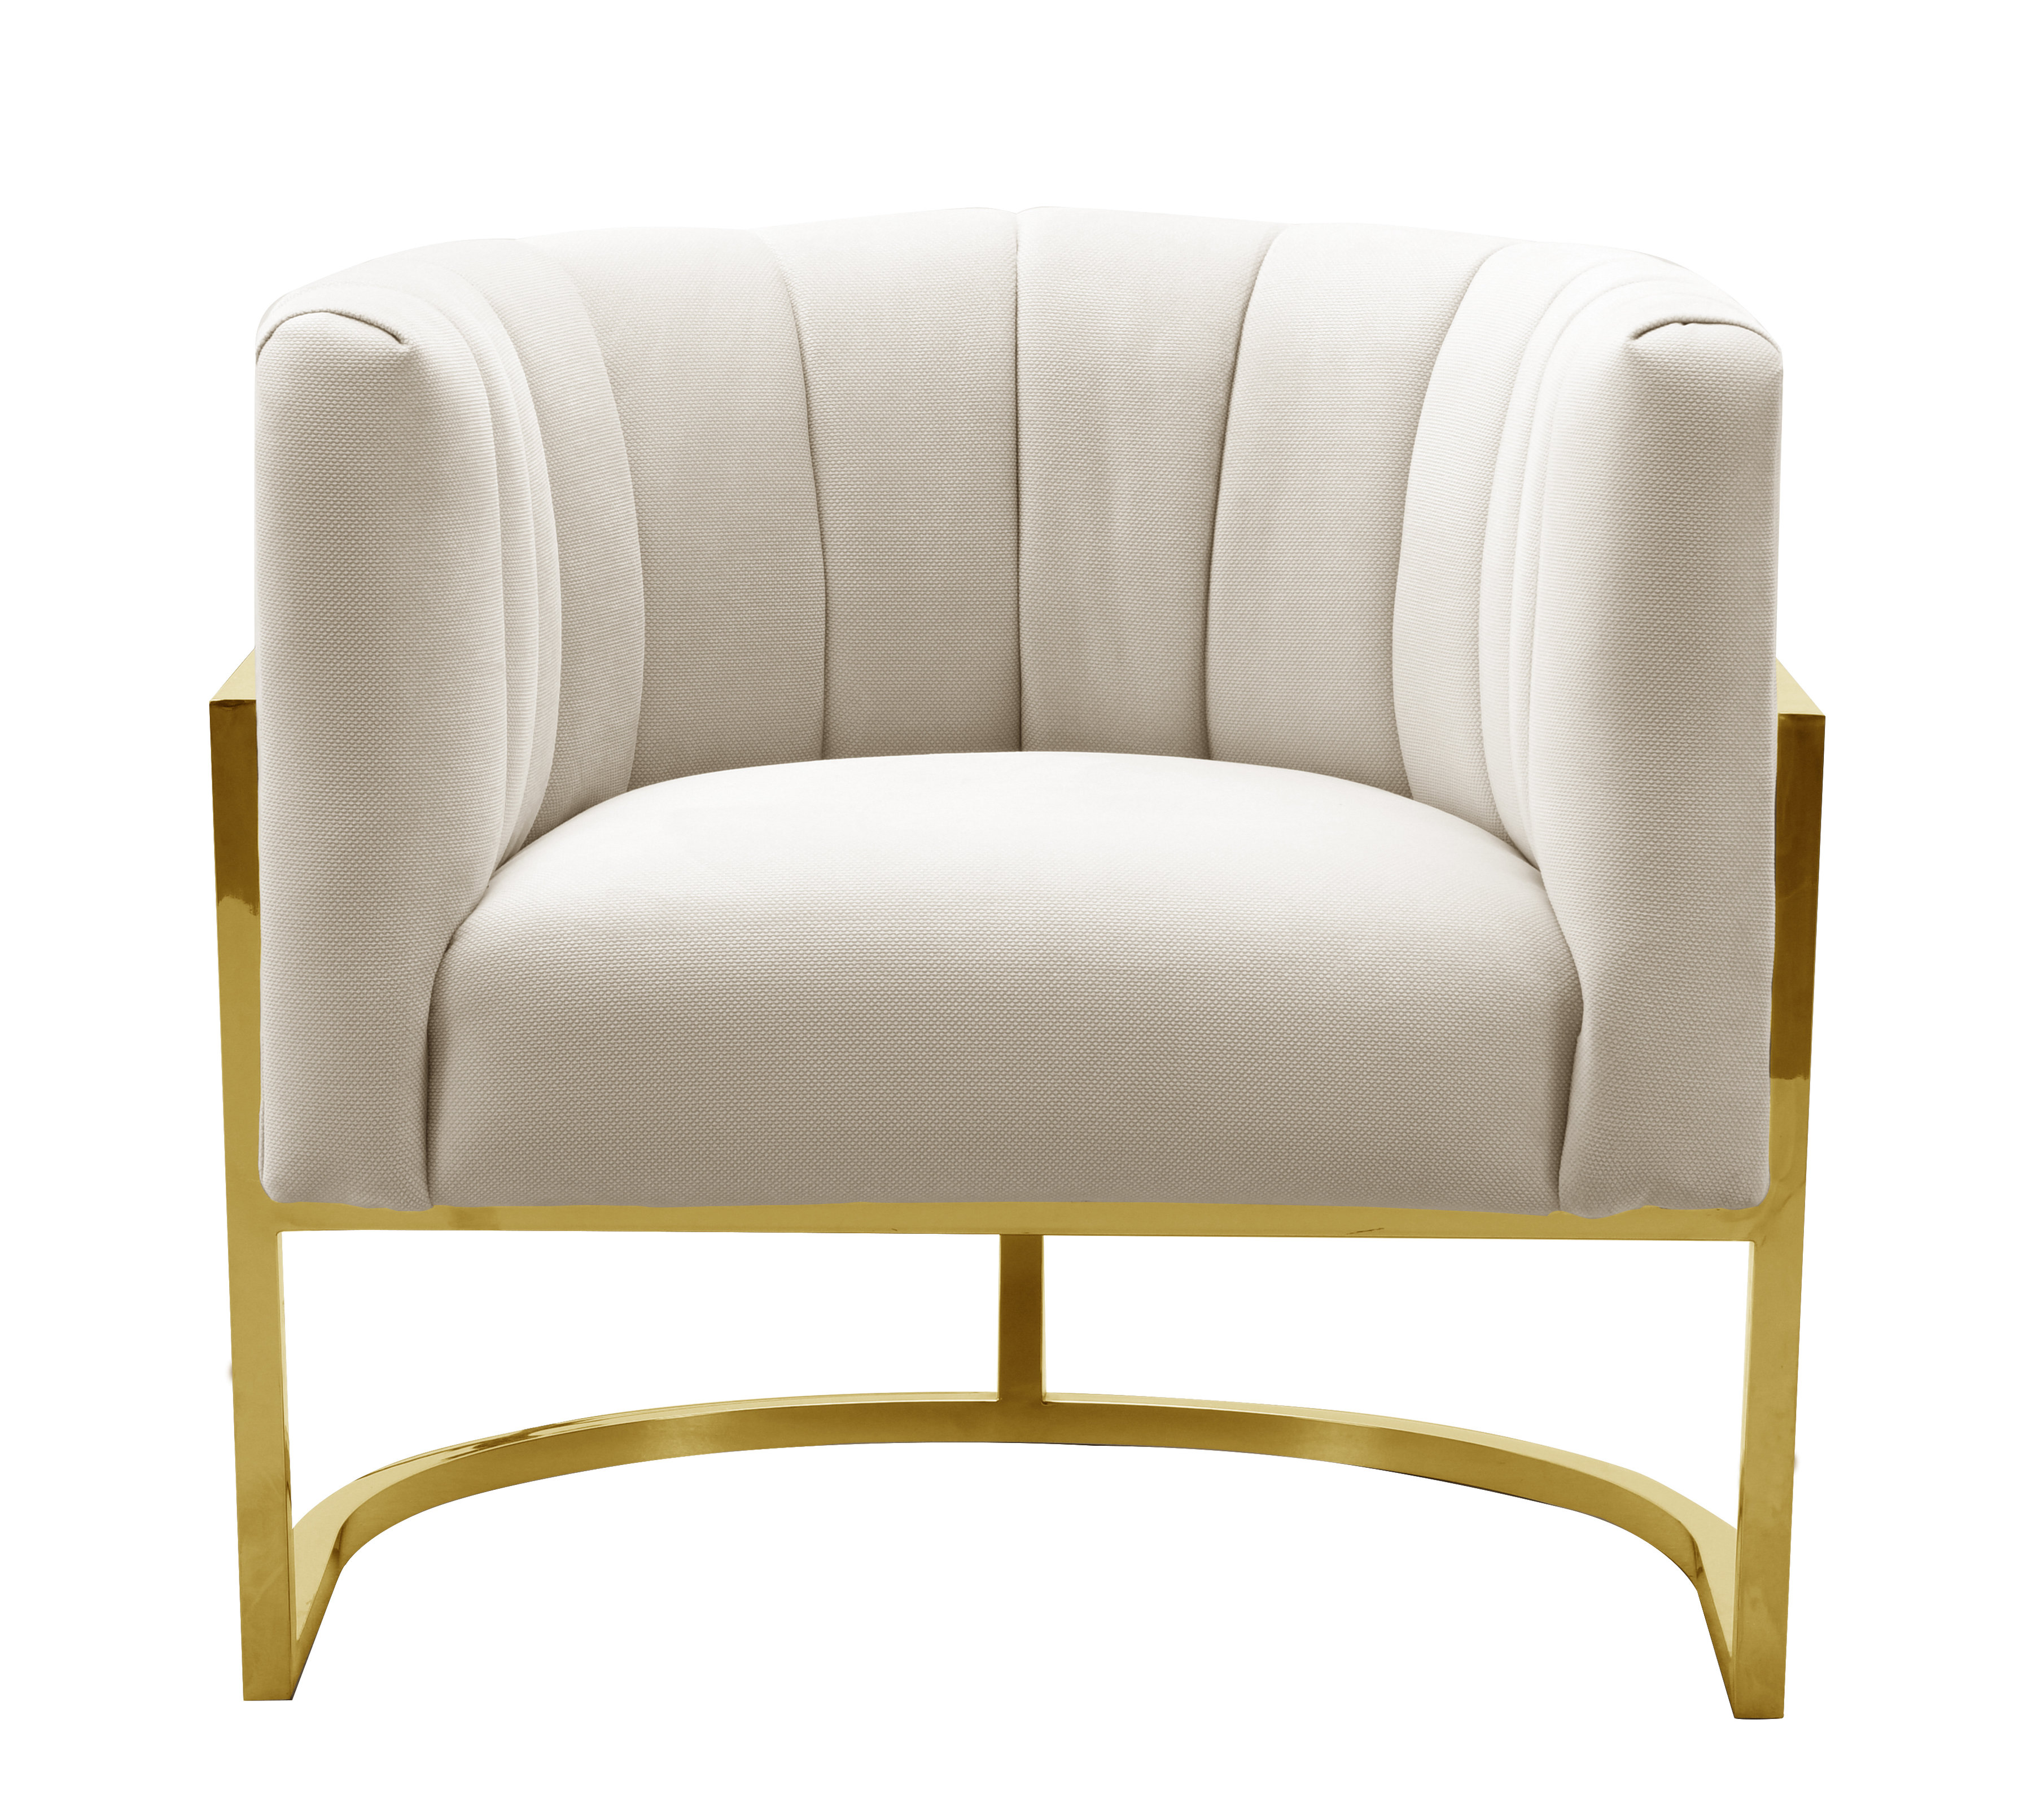 Magnolia Spotted Cream Chair with Gold - TOV-S6150